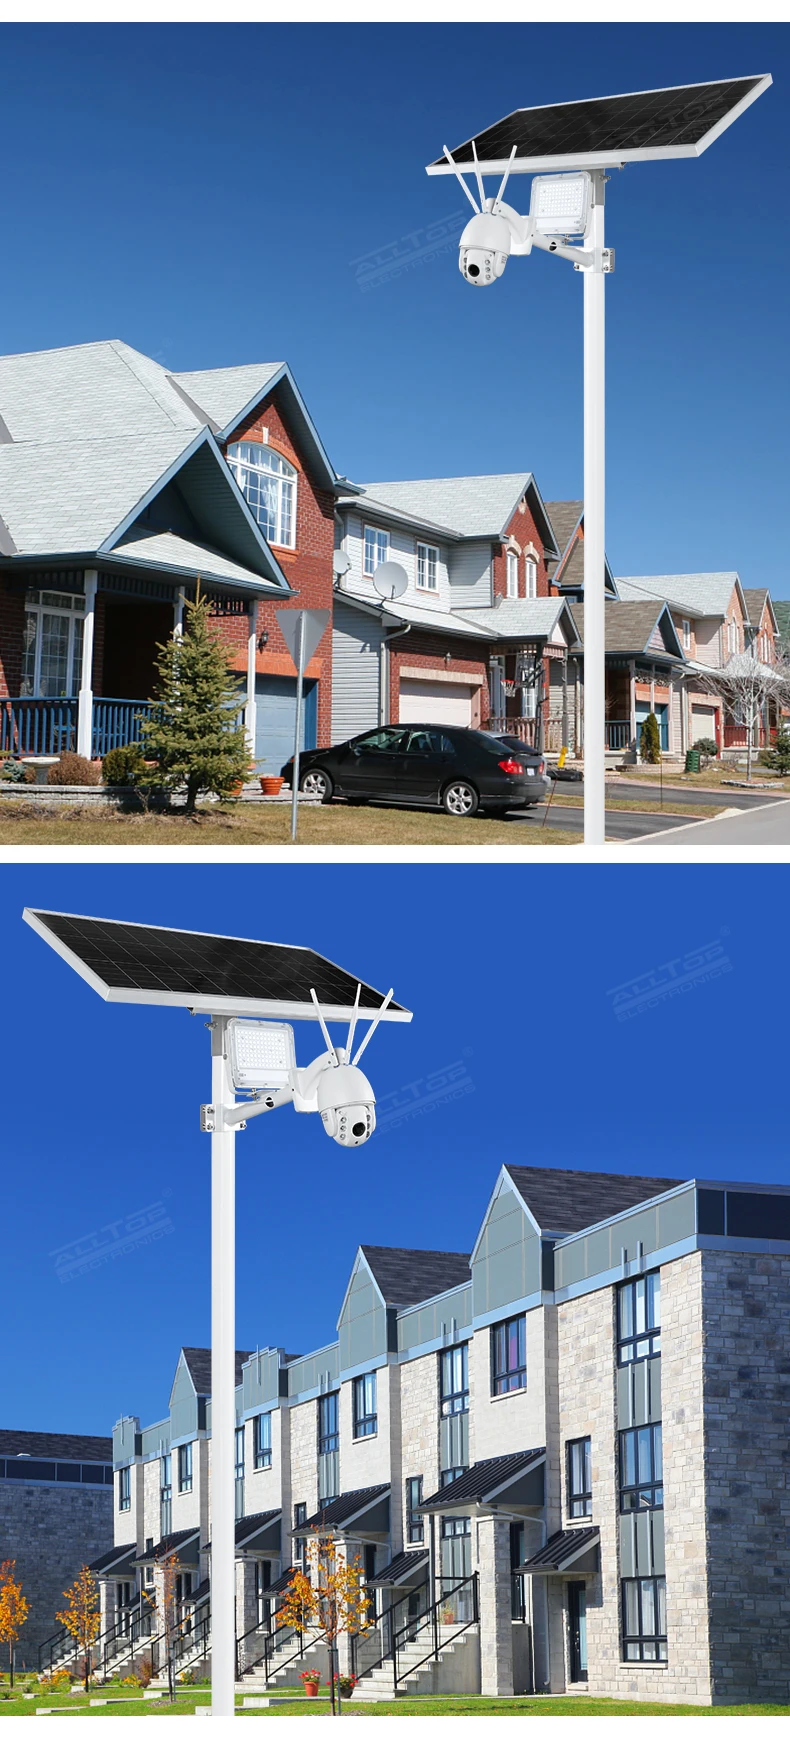 ALLTOP Wireless remote control outdoor solar power supply led flood light lamp with cctv ip camera